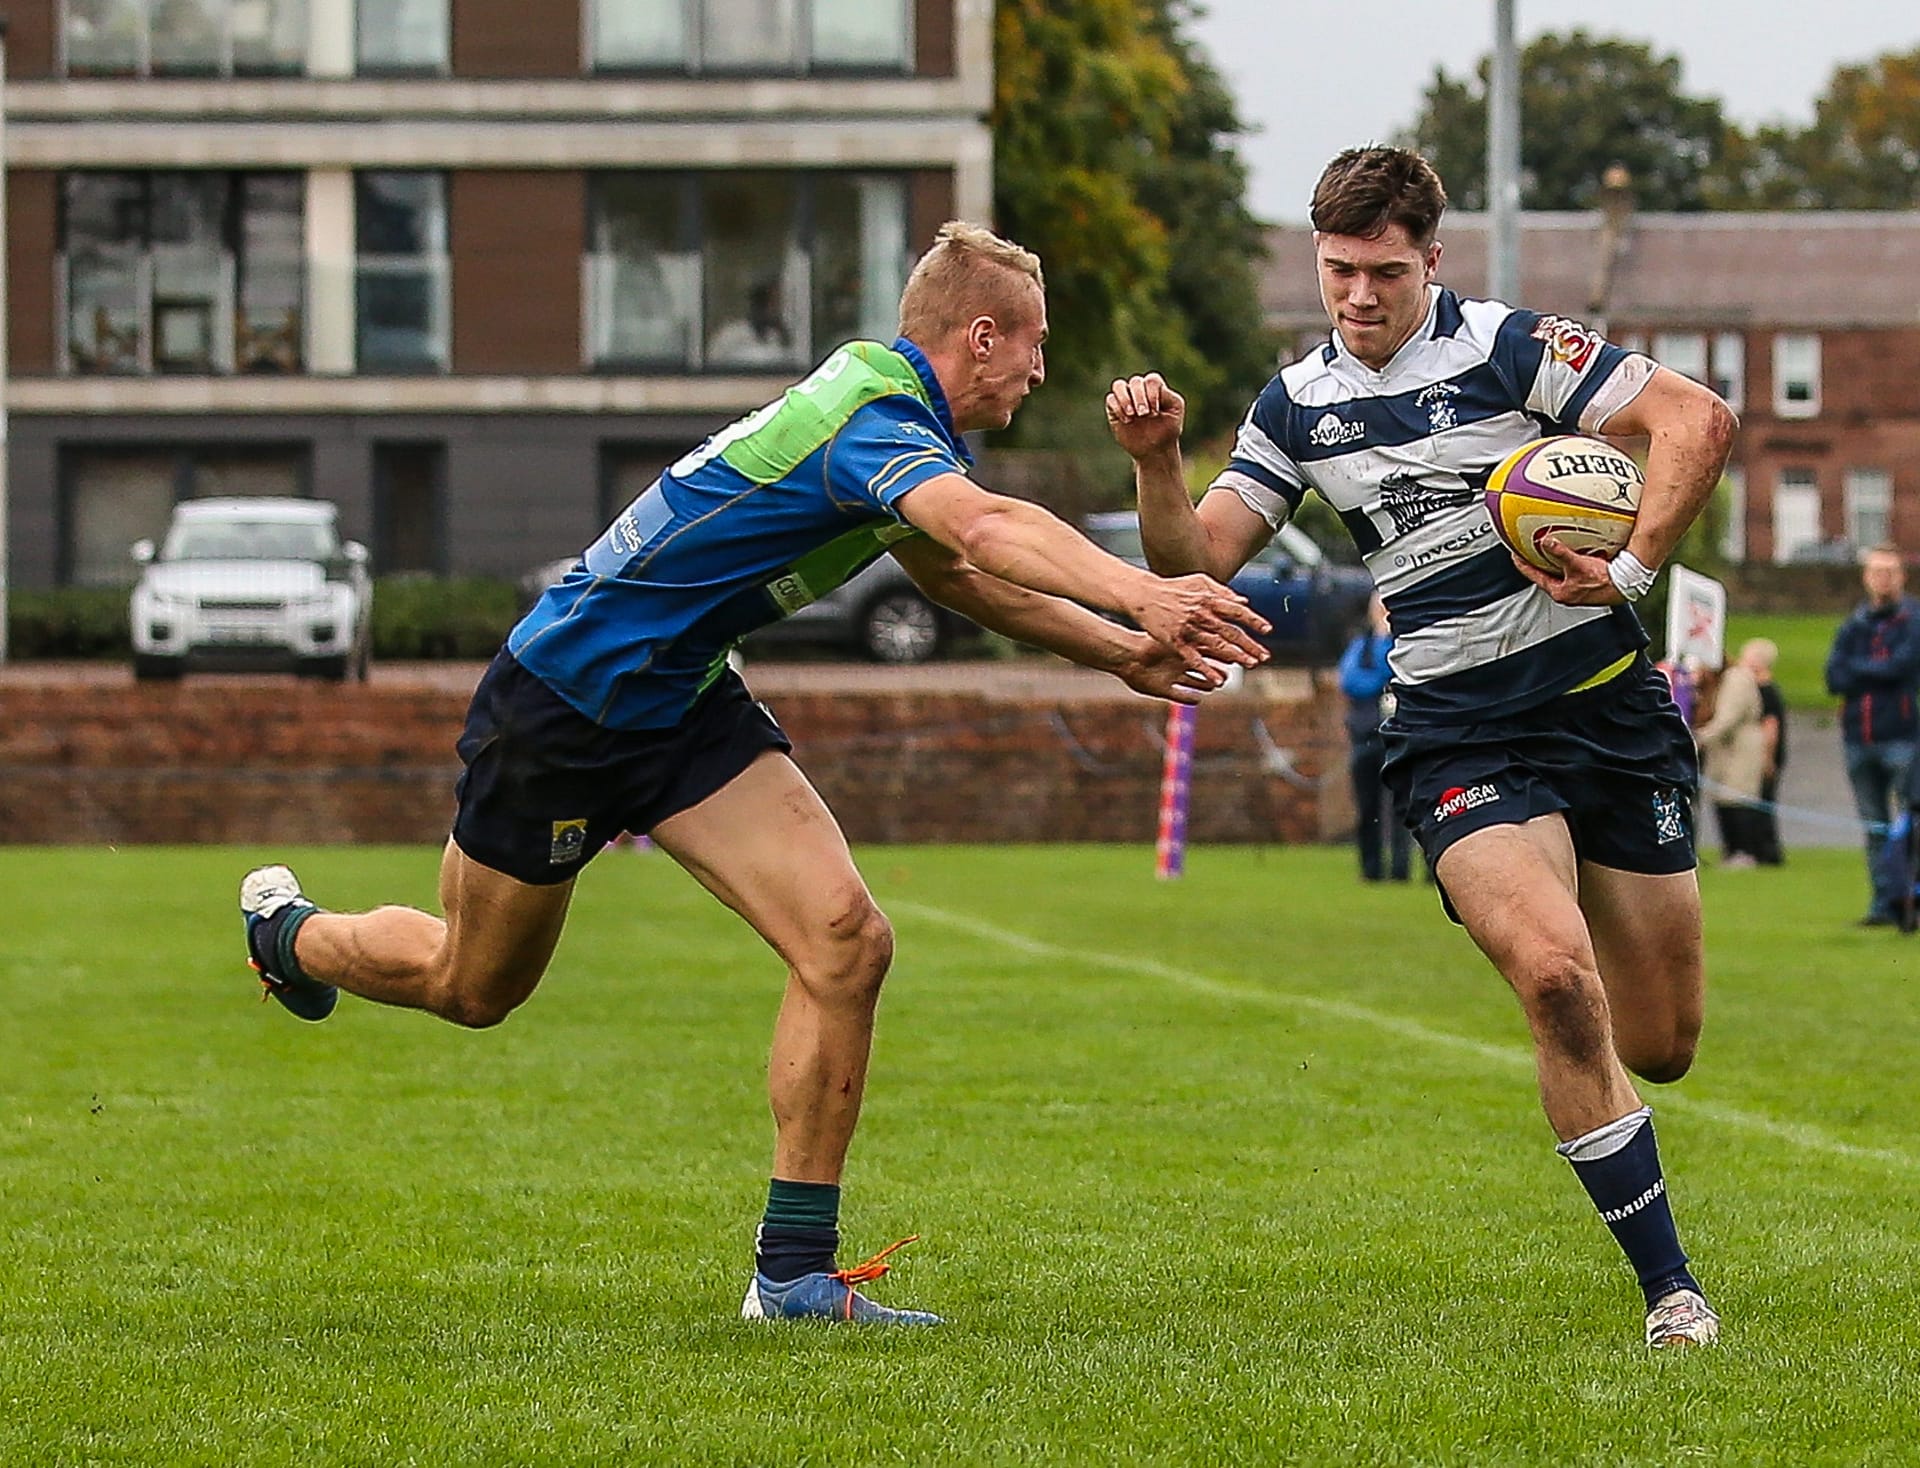 Heriots Ben Evans drives towards the line as Boroughmuirs Duncan Munn tries to make the tackle.FOSROC Super 6 match between Heriot's Rugby and Boroughmuir Bears at Goldenacre, Edinburgh on 09/10/2021. (Photo: 39 Design Photography)